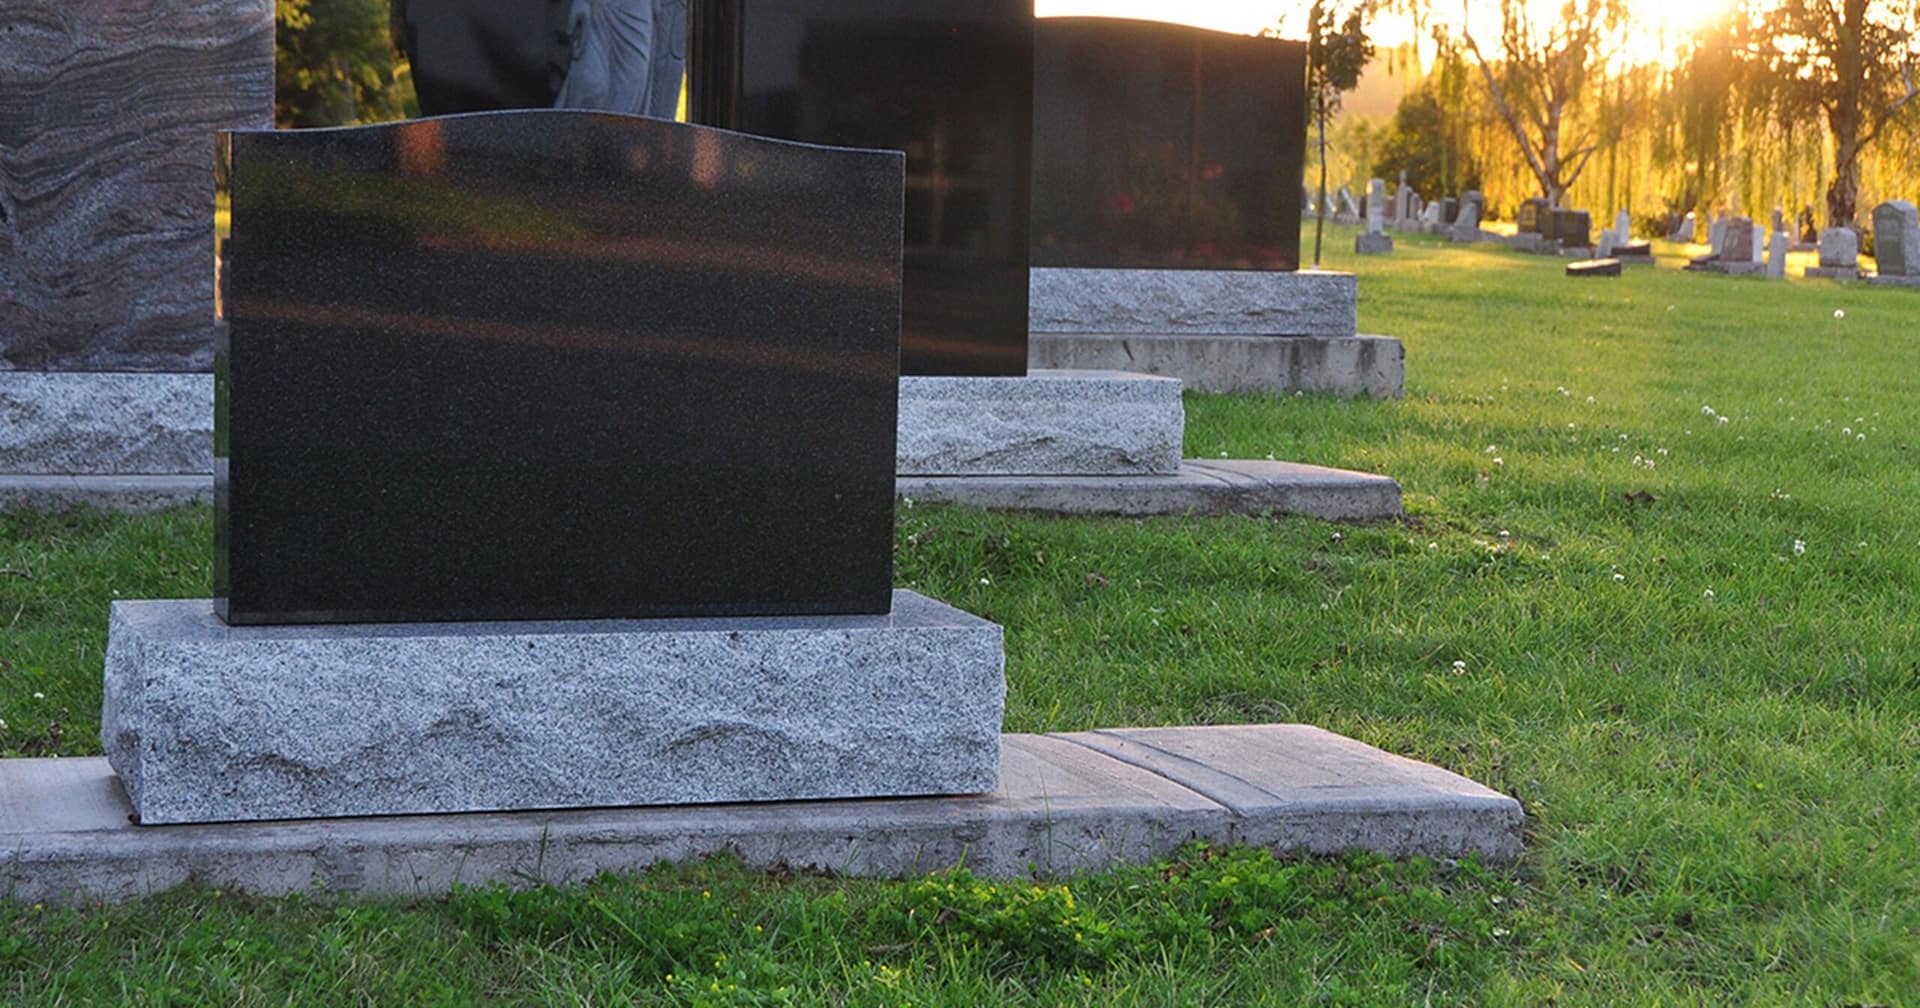 Choosing Between Upright & Flat Grave Markers: Which is Best?